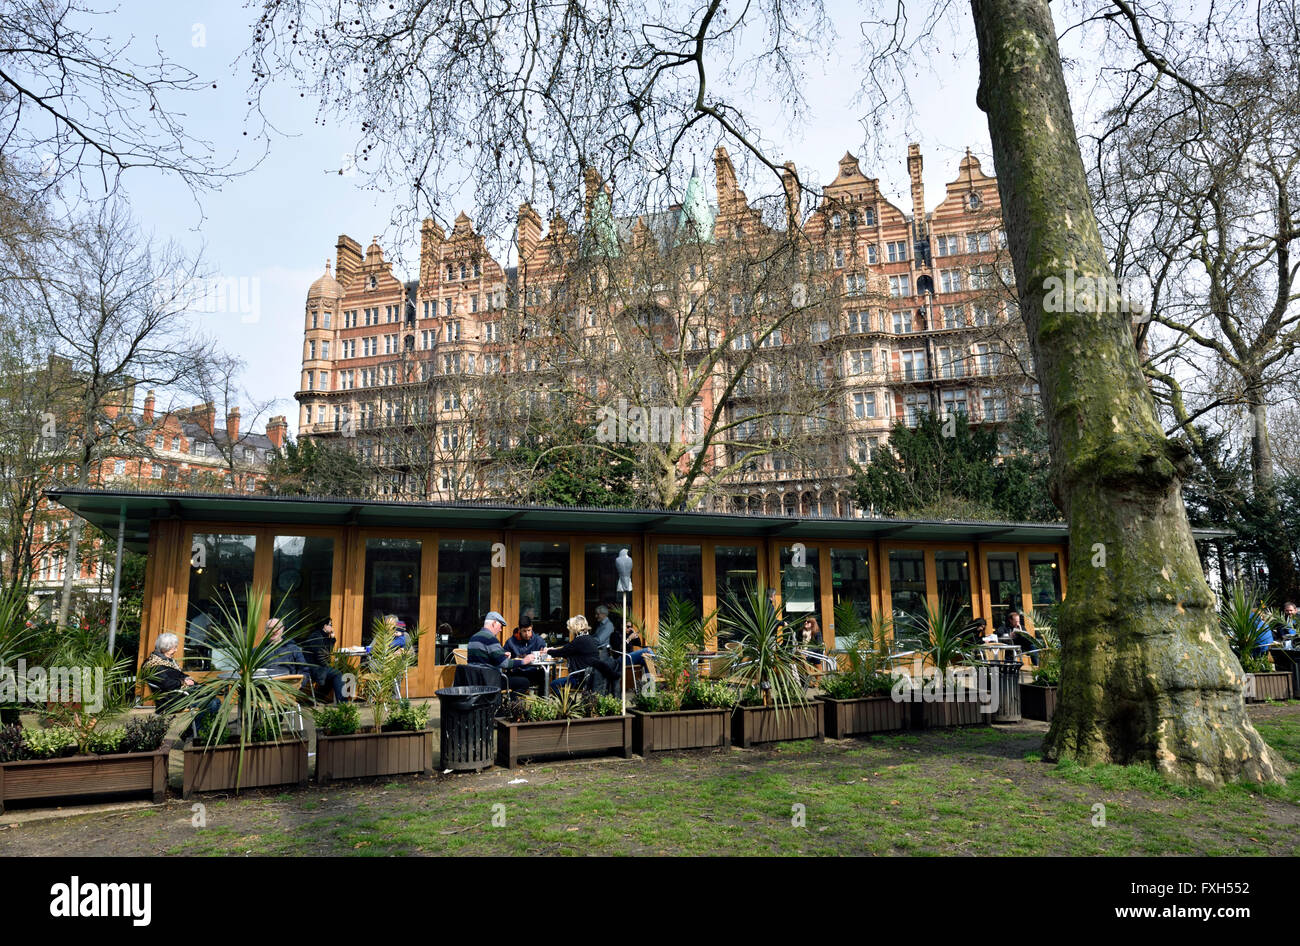 The Cafe in the Garden with people eating outside Russell Square London Borough of Camden England Britain UK Stock Photo